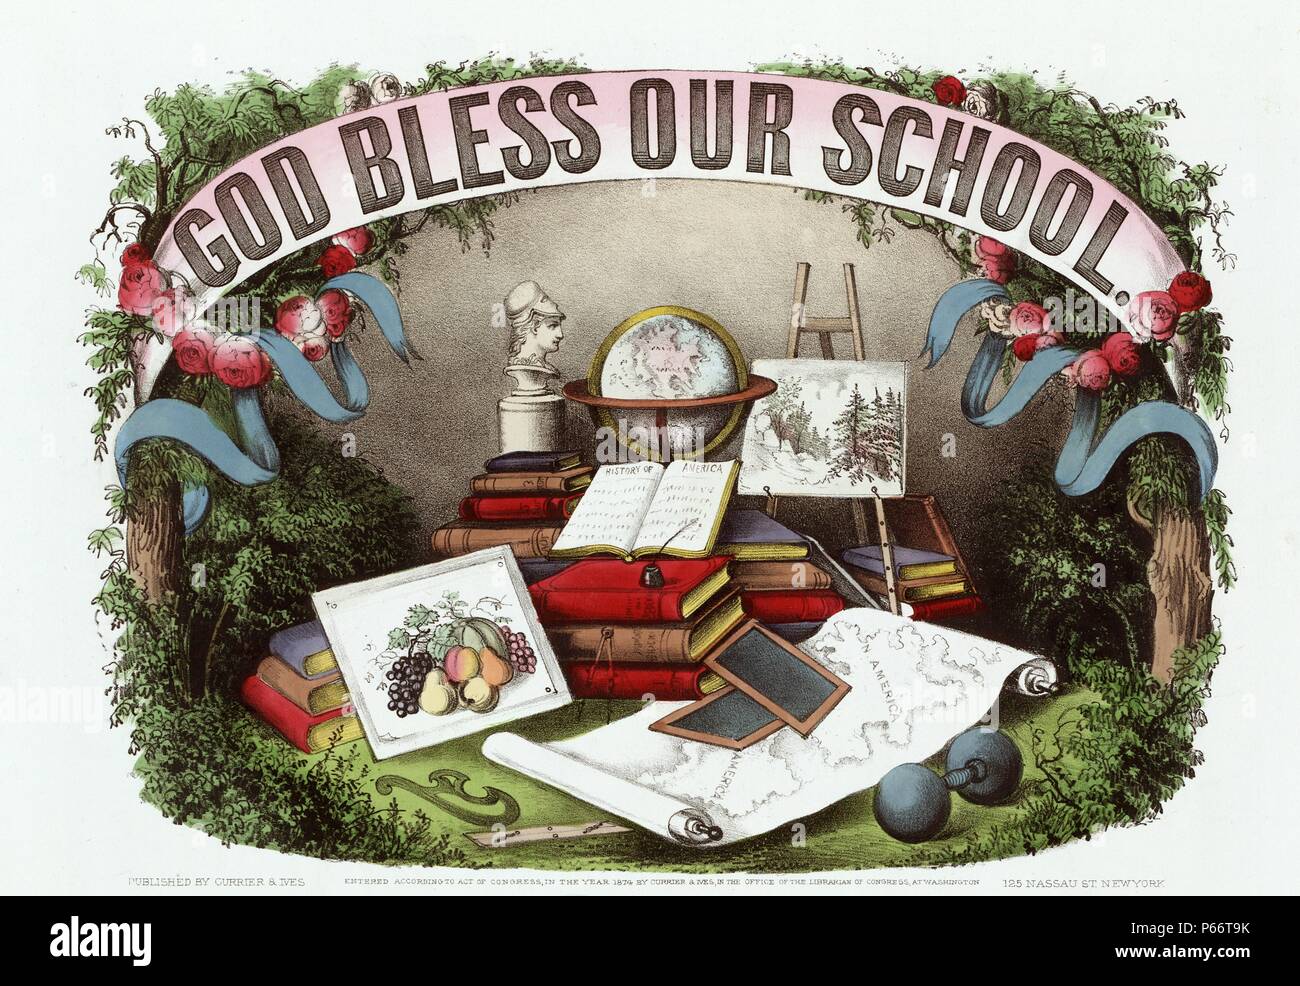 God bless our school. Published: New York by Currier & Ives, 1874. Print shows books, a globe, a bust sculpture, a still life painting and a painting depicting the majesty of nature, two chalk slates, and a map of America. Stock Photo